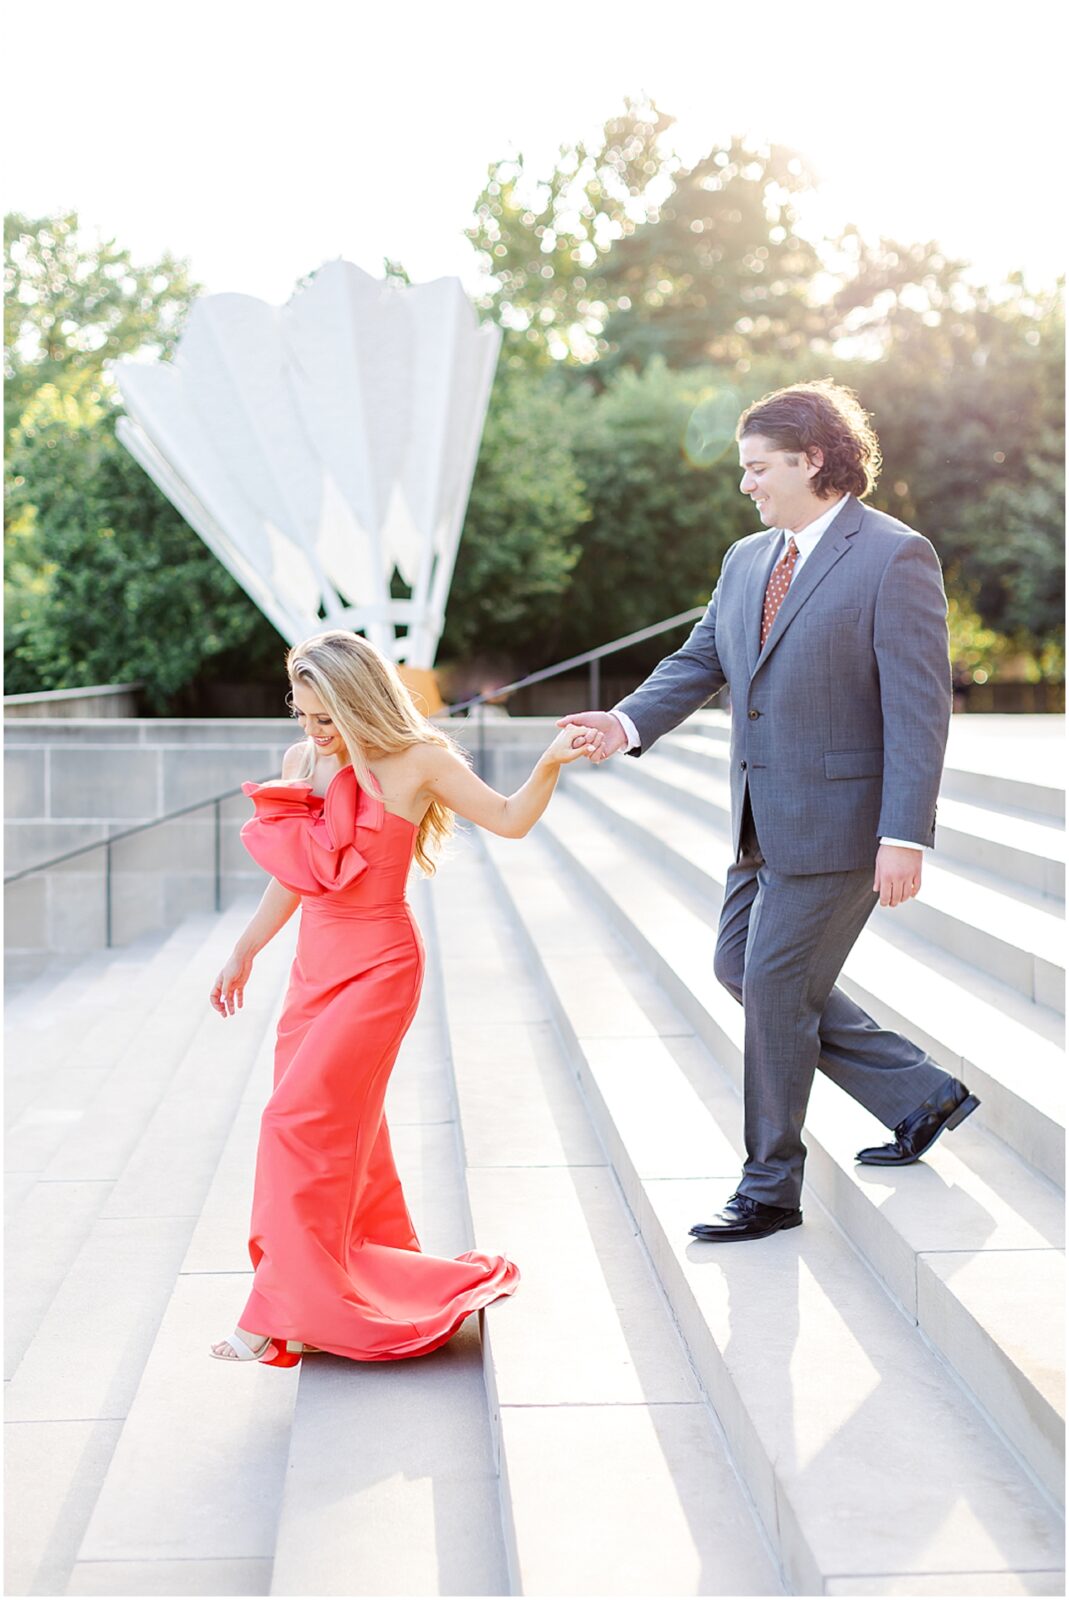 nelson atkins museum of art wedding and engagement photos 